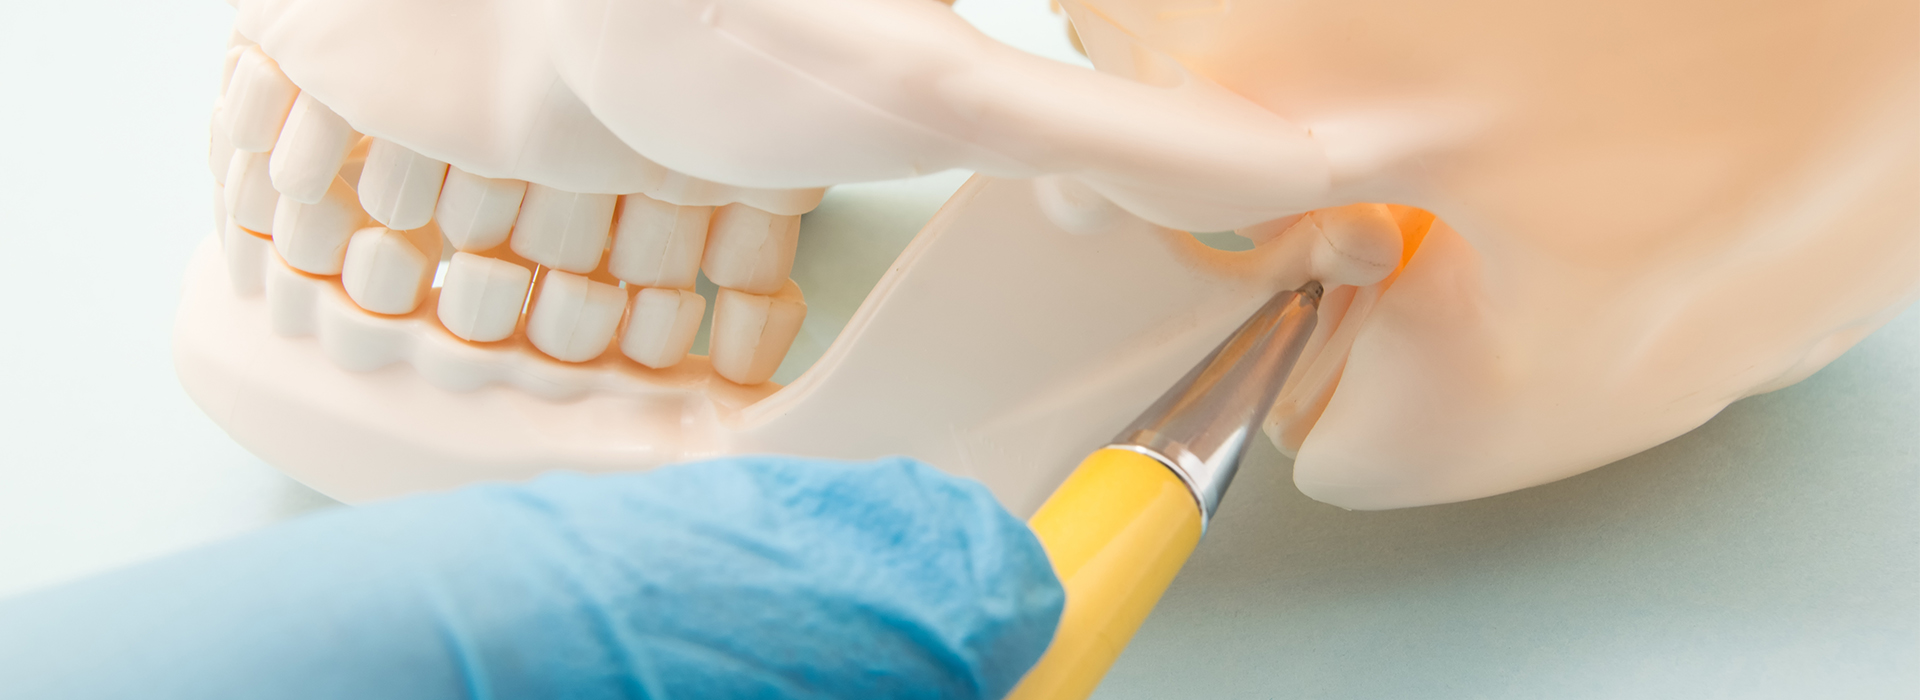 Napa Dental | Root Canals, Cosmetic Dentistry and TMJ Disorders